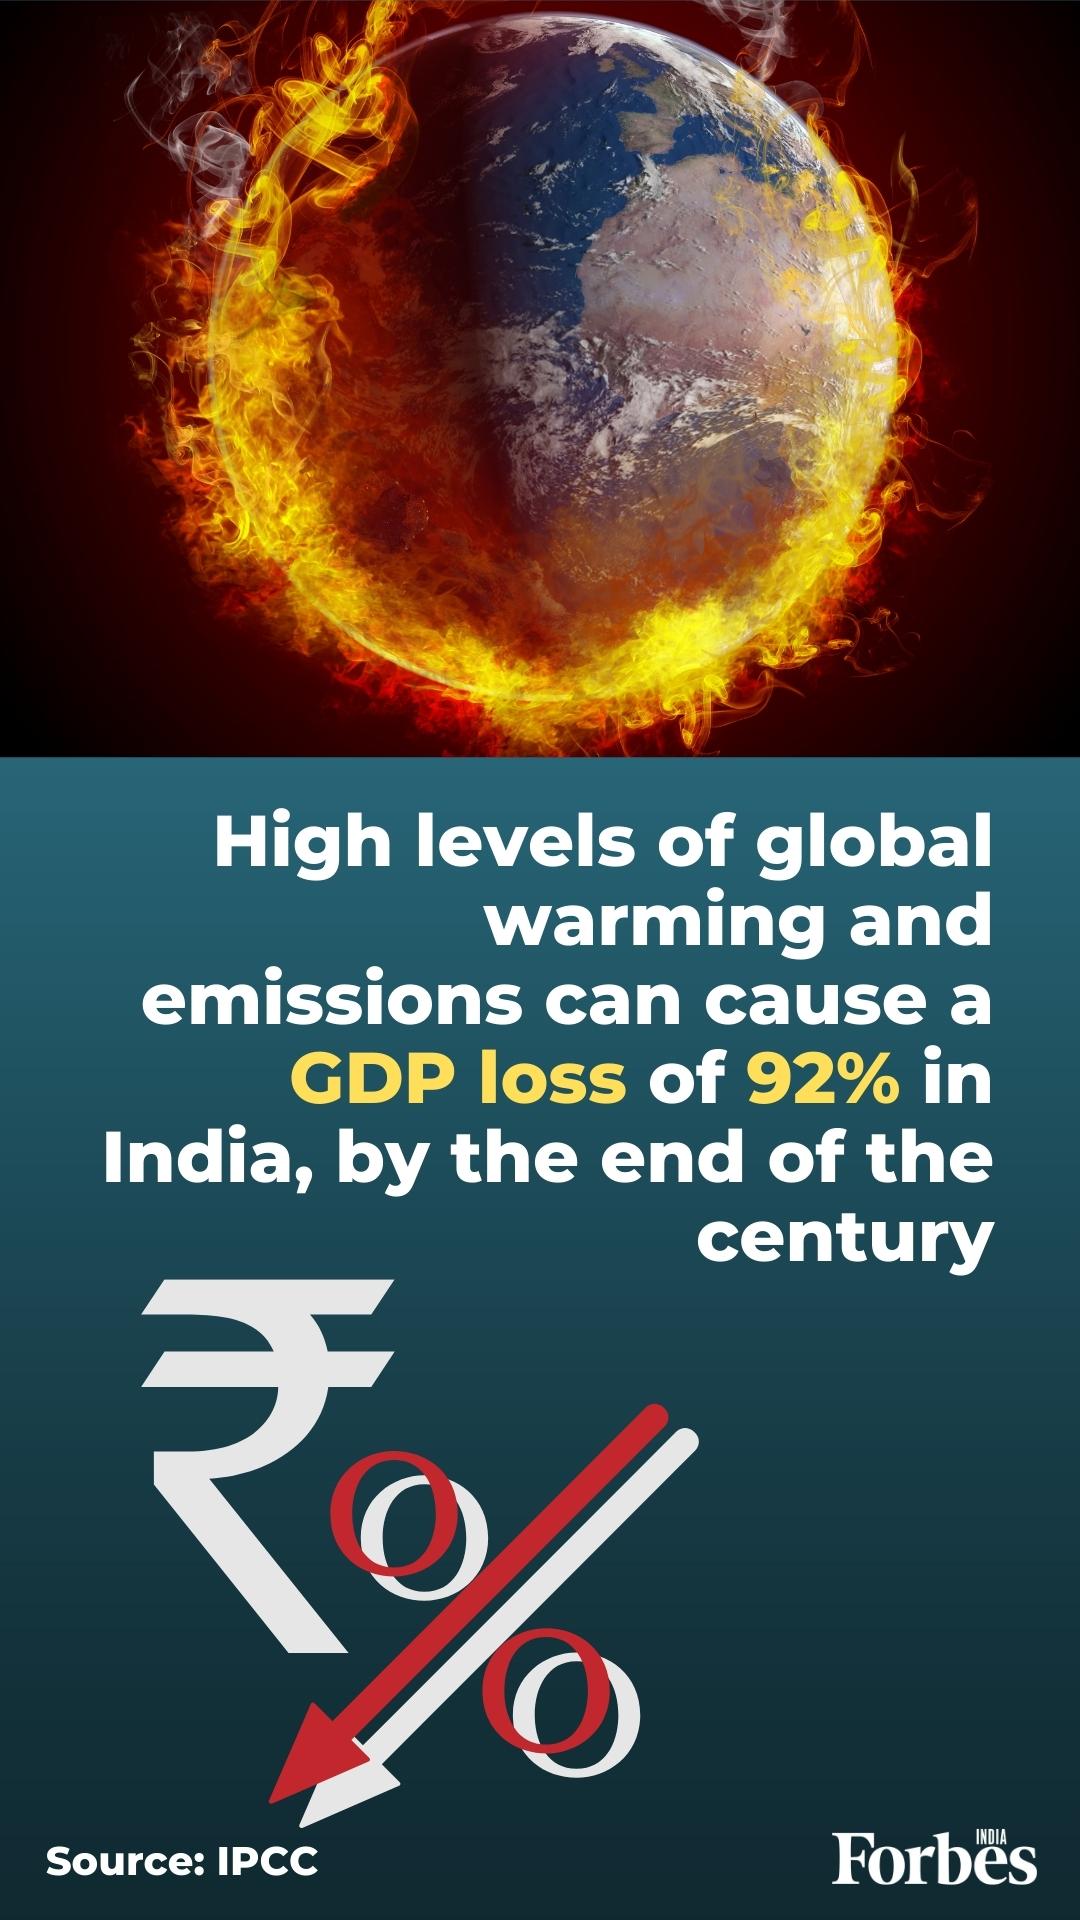 India can face 92% GDP loss by 2100 due to global warming : IPCC report